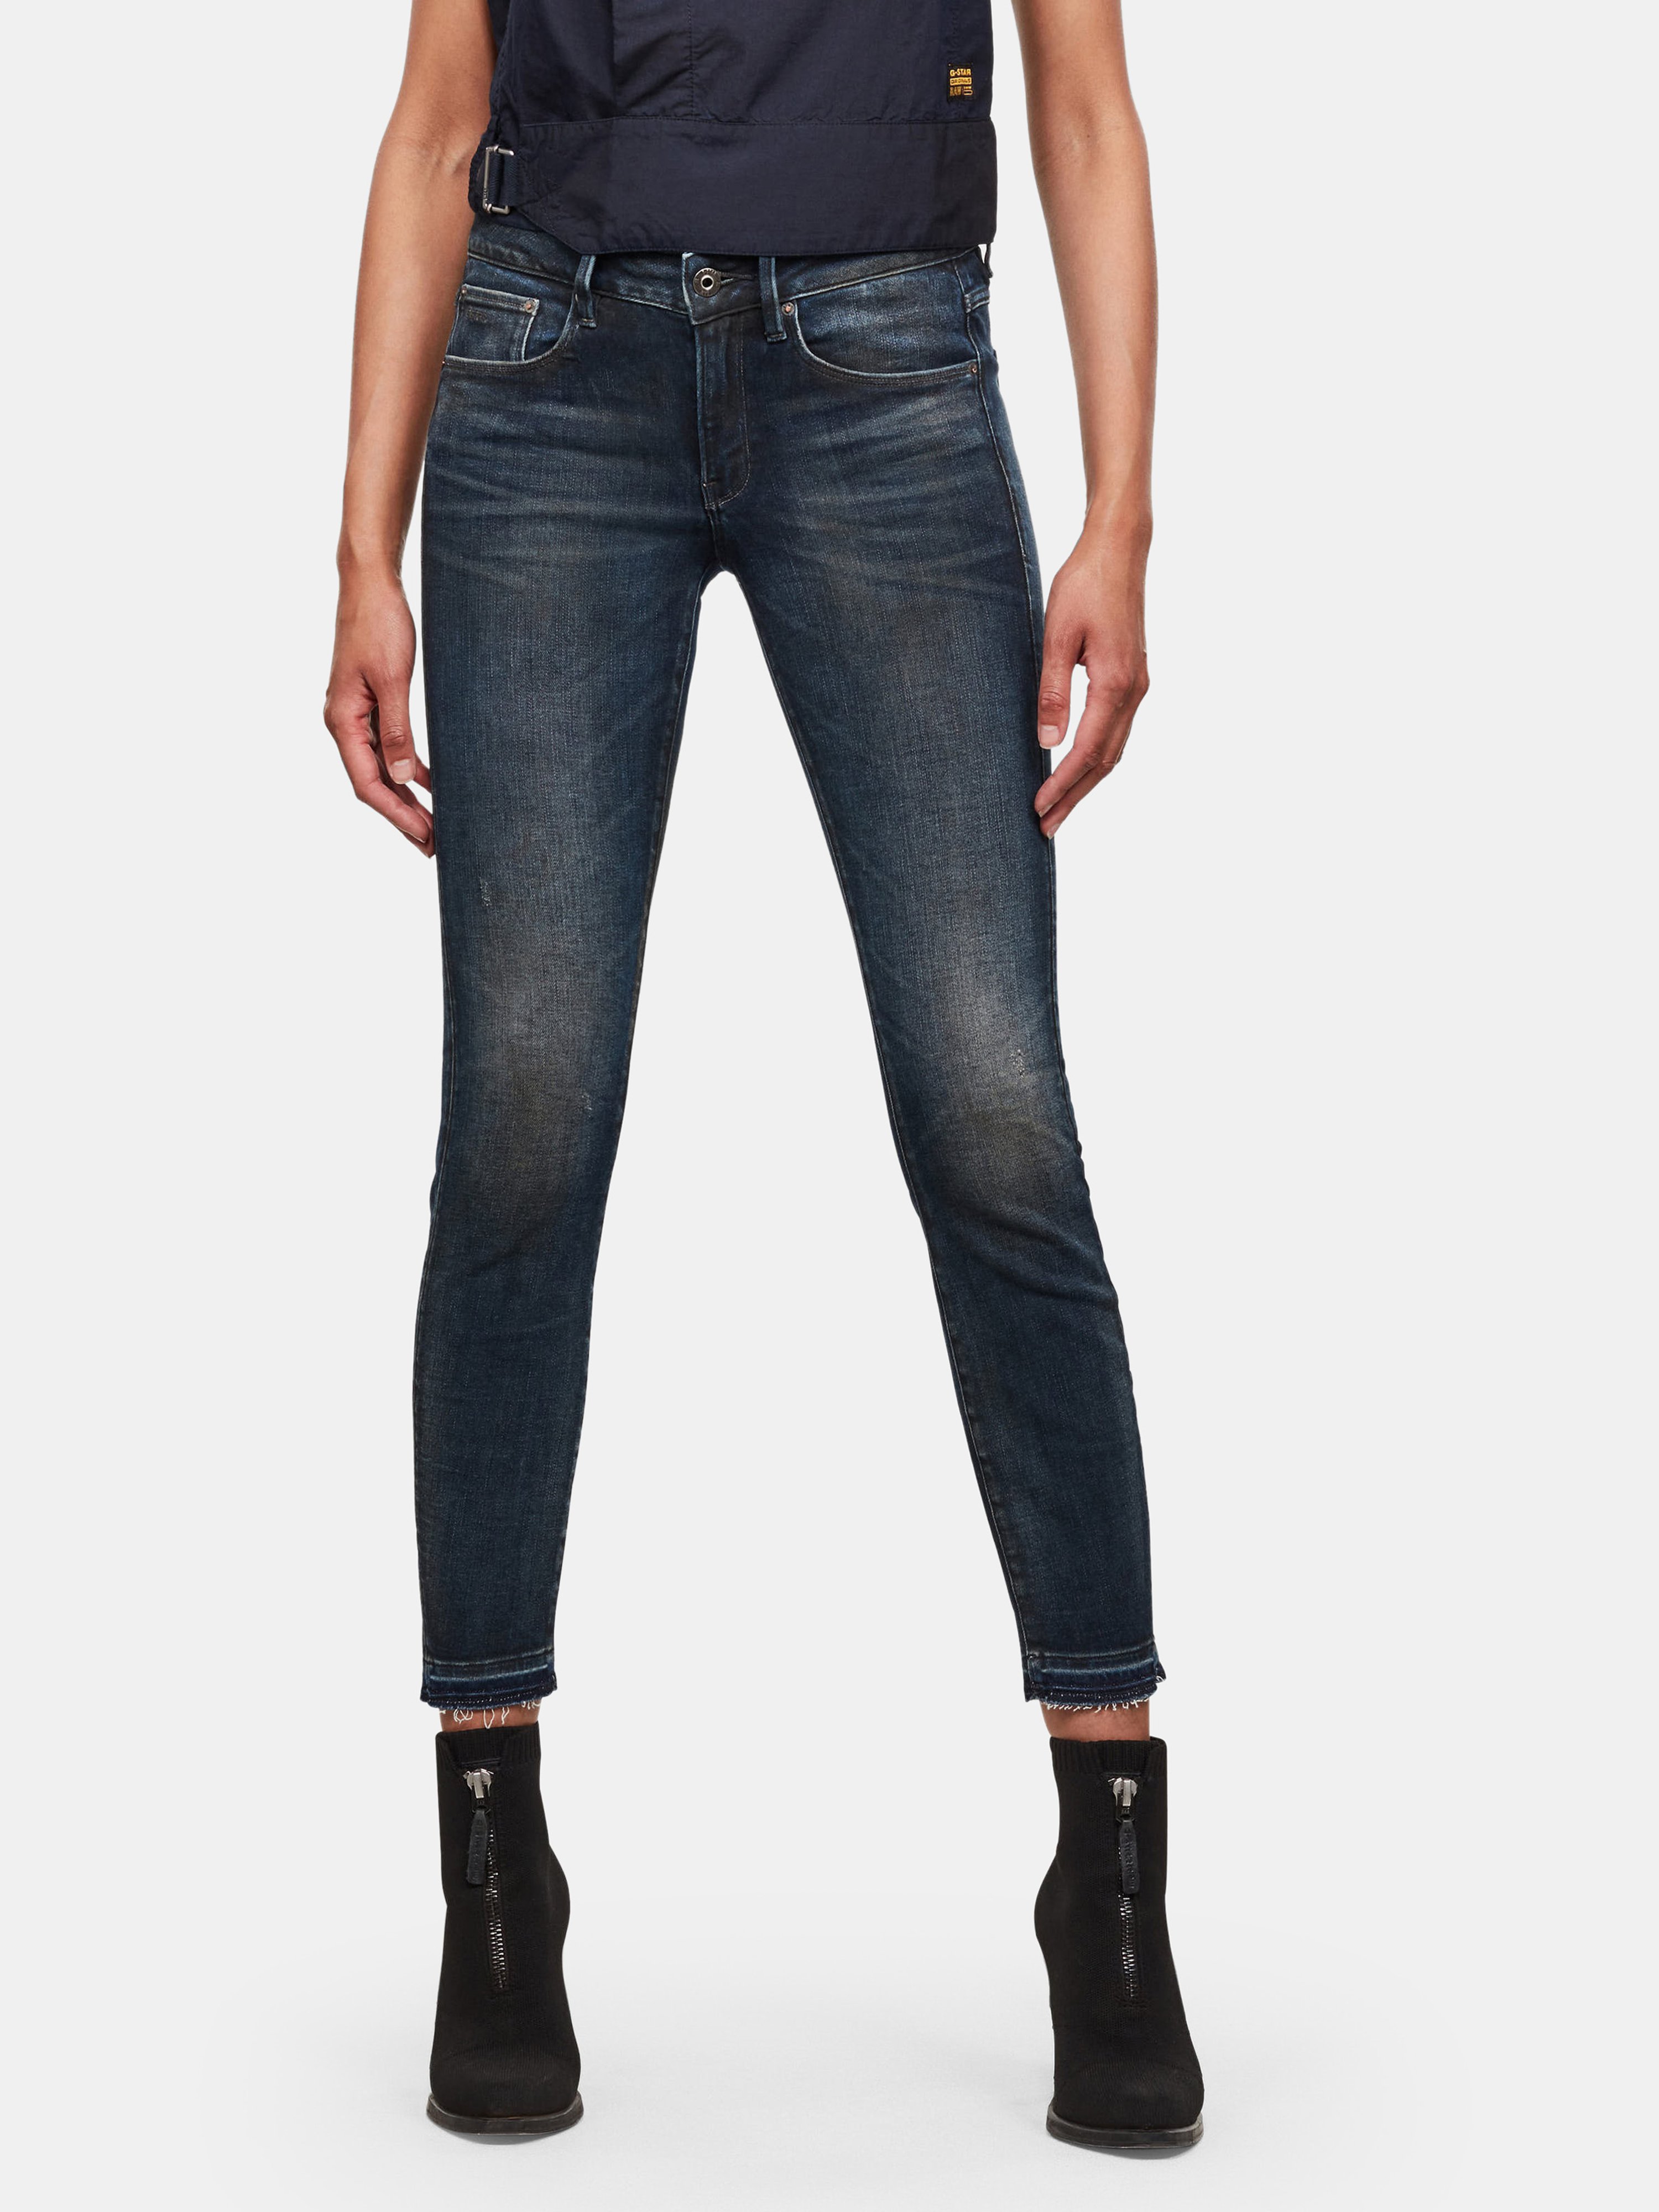 G-STAR G STAR 3301 MID SKINNY RIPPED EDGE ANKLE JEANS